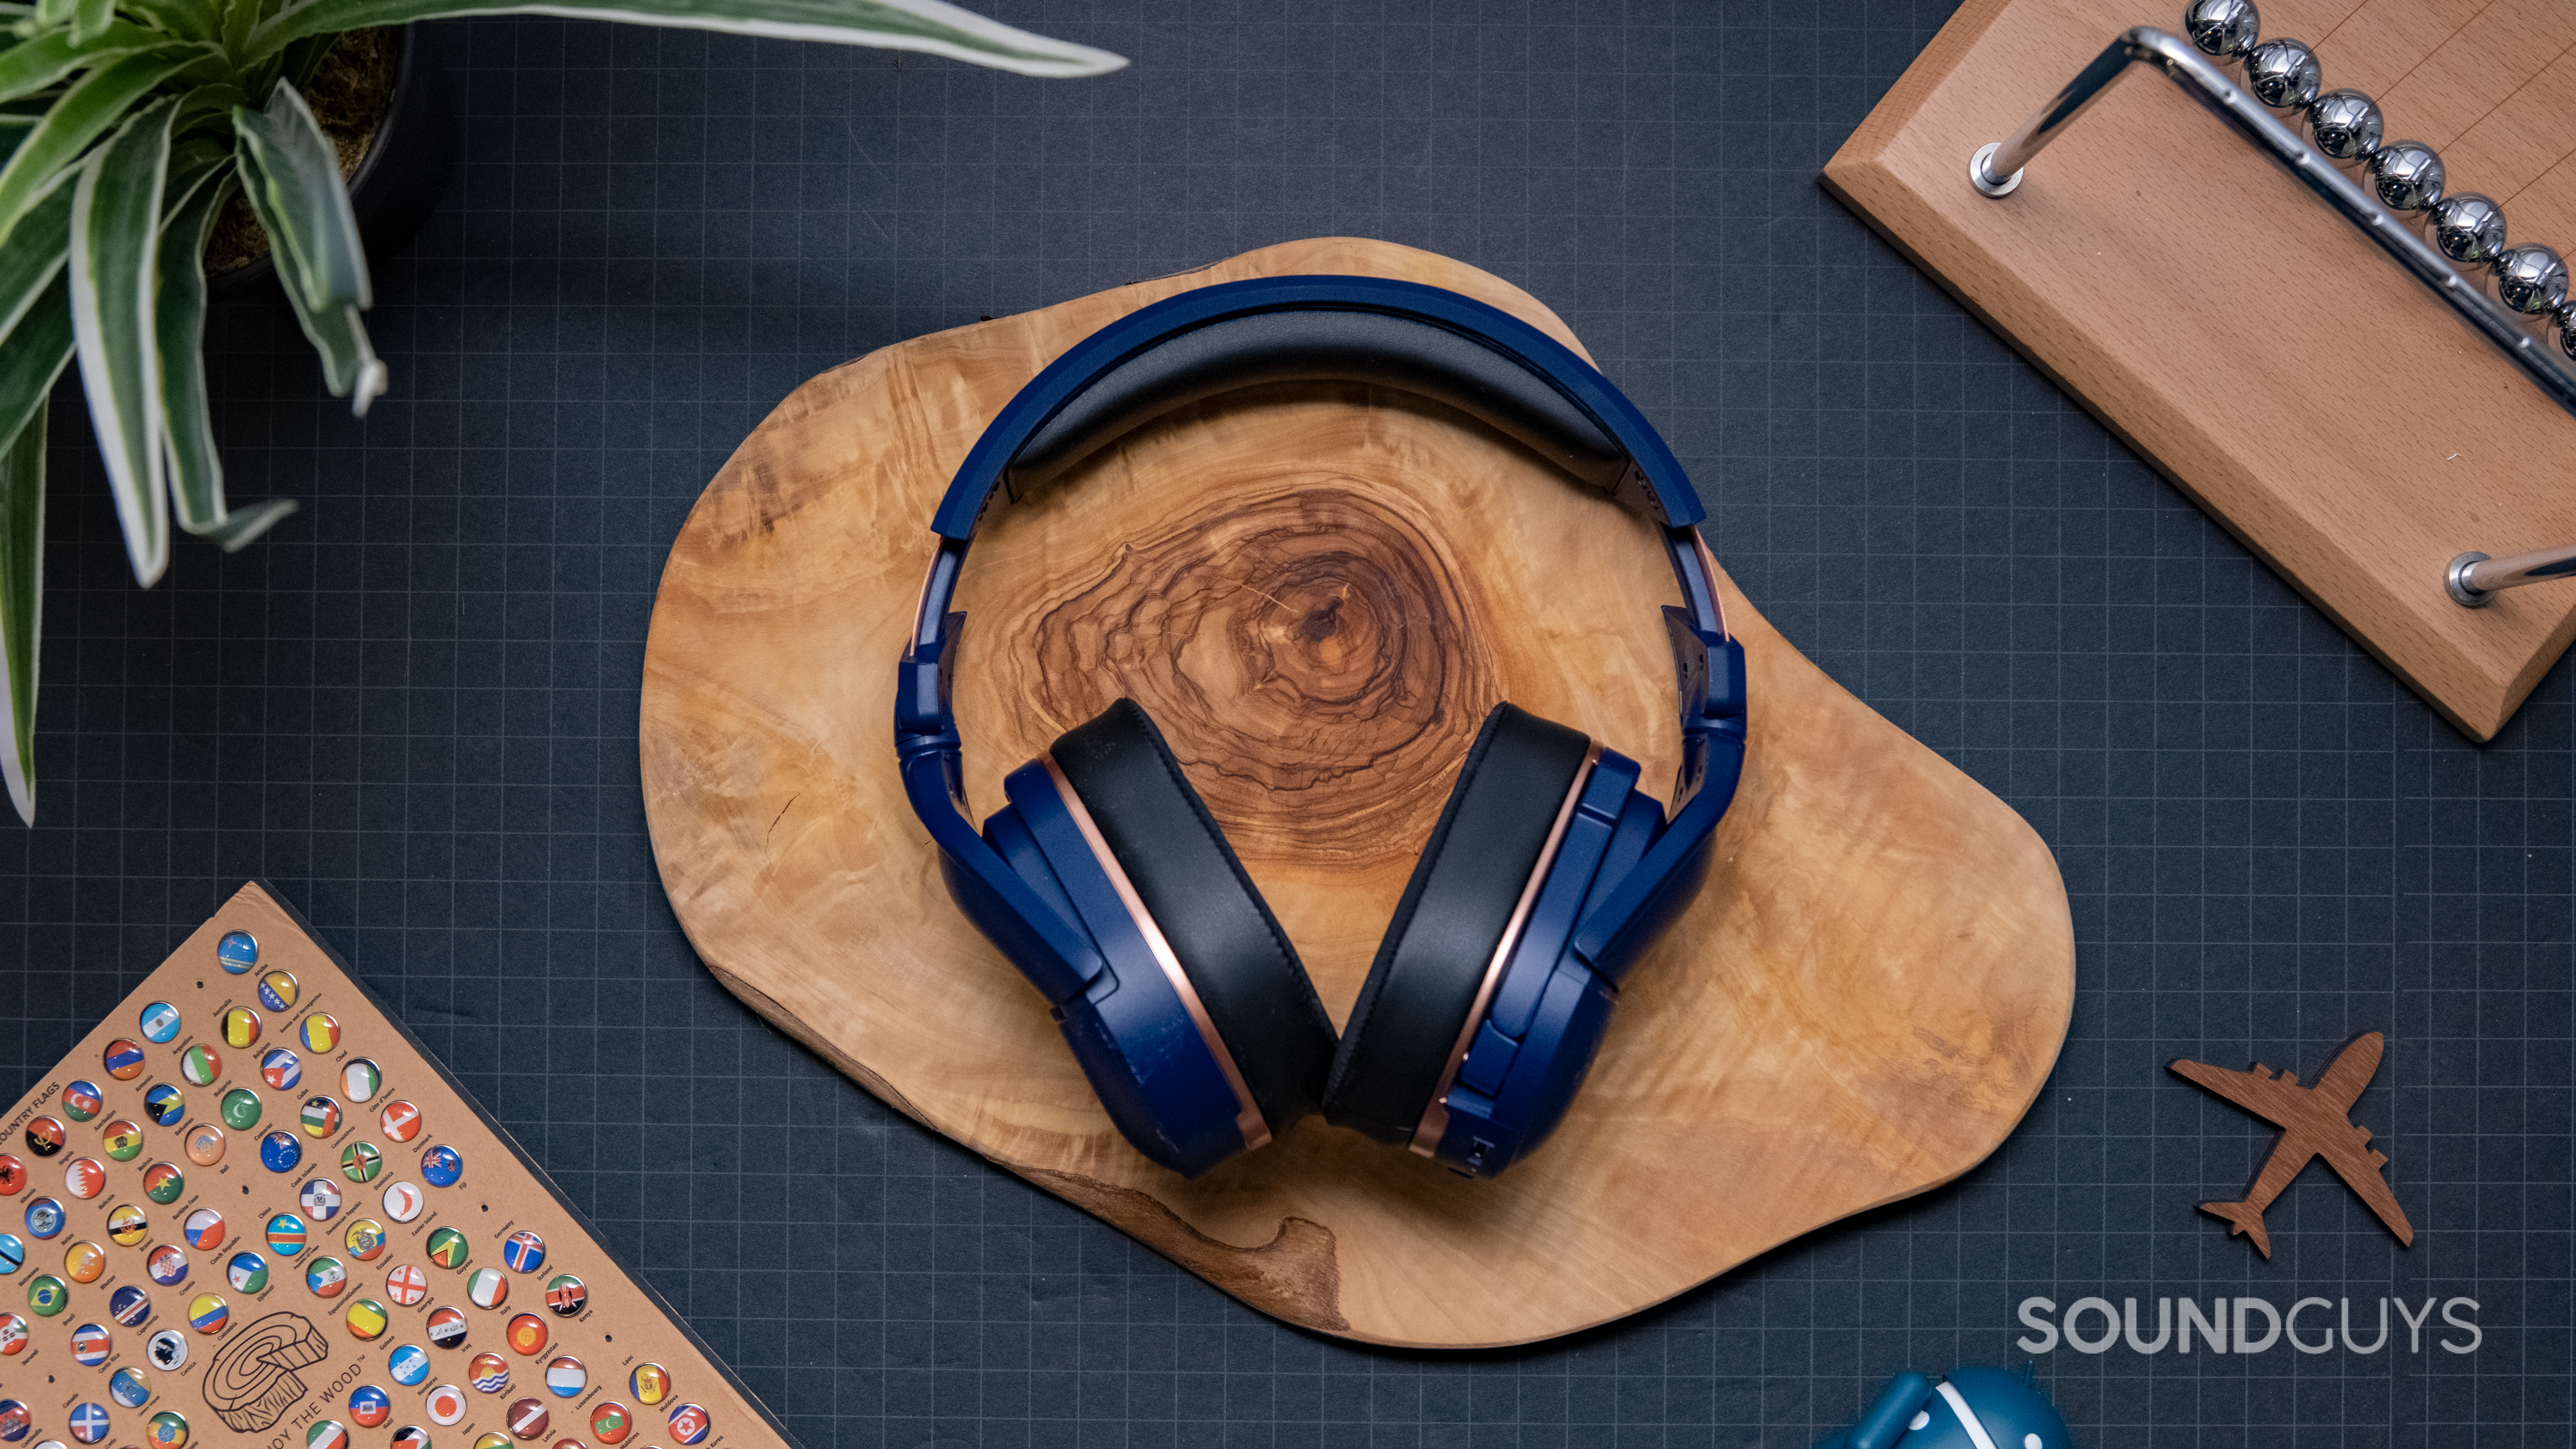 The Turtle Beach Stealth 700 Gen 2 MAX placed atop a woodgrain surface